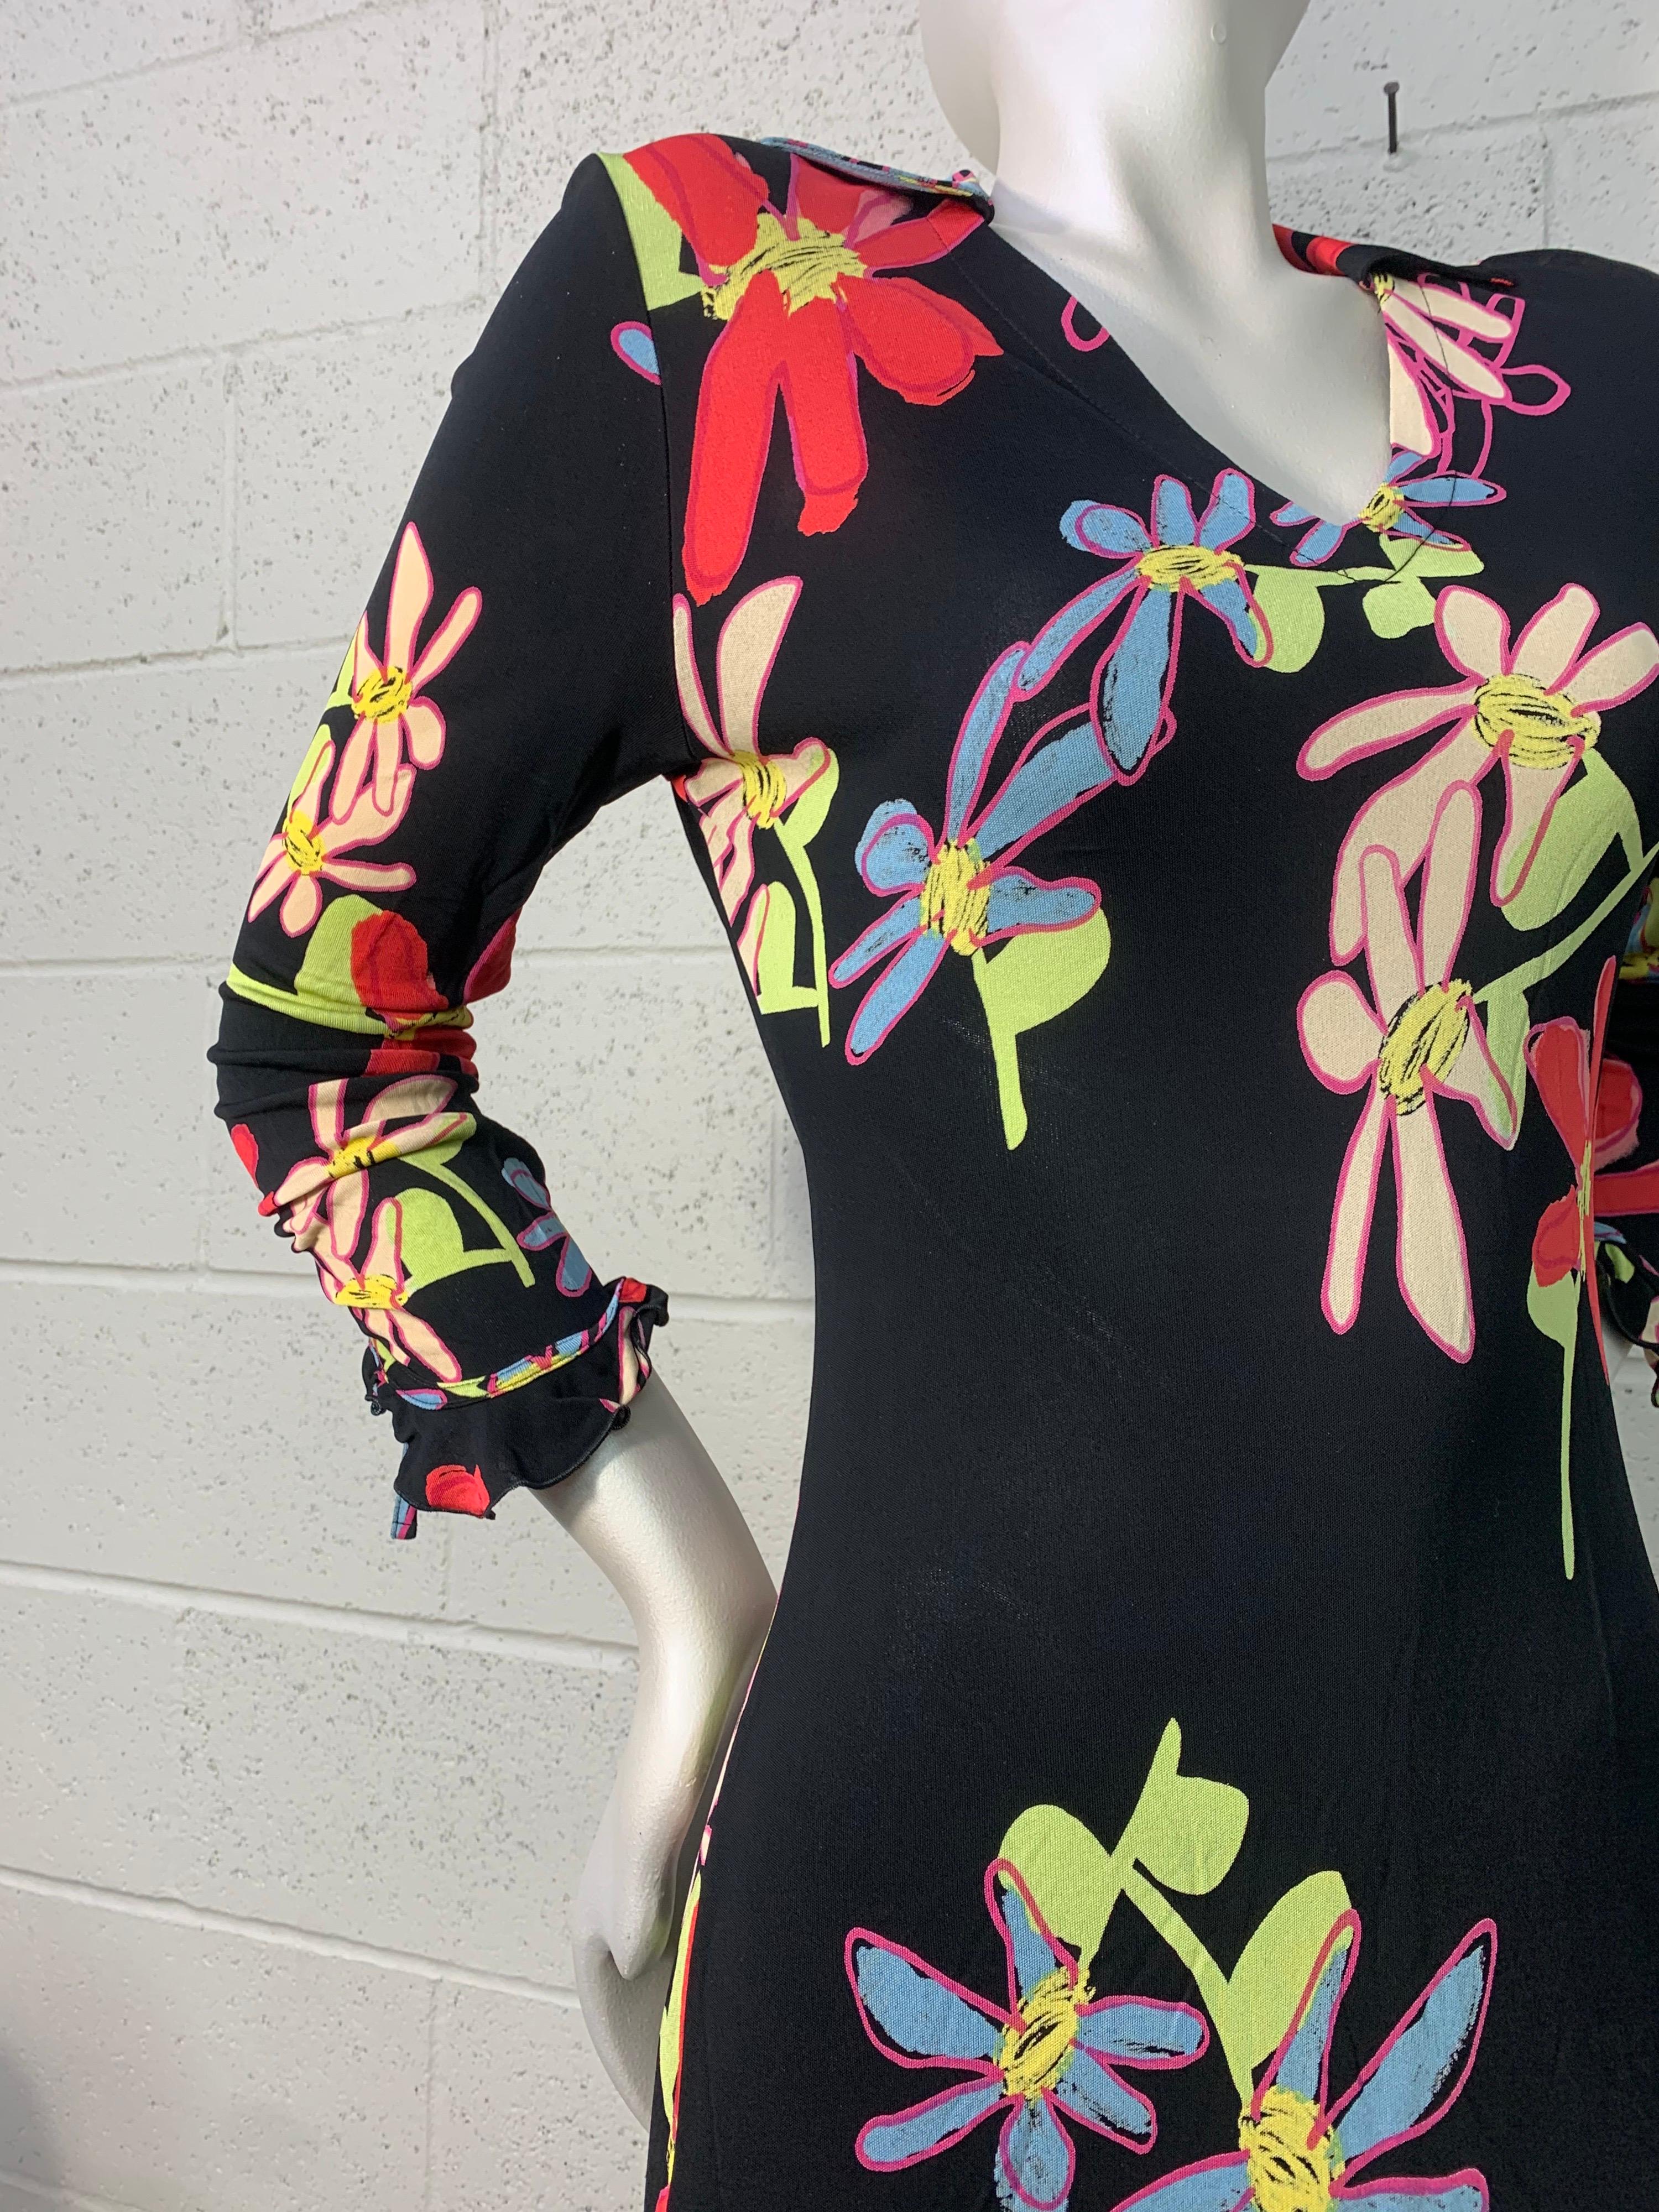 A flirty 2000s Christian Lacroix bias-cut 1930s-inspired rayon jersey dress with stylized floral print: Mid-calf length. Ruffle and tie detail at cuffs. Size EU 44.